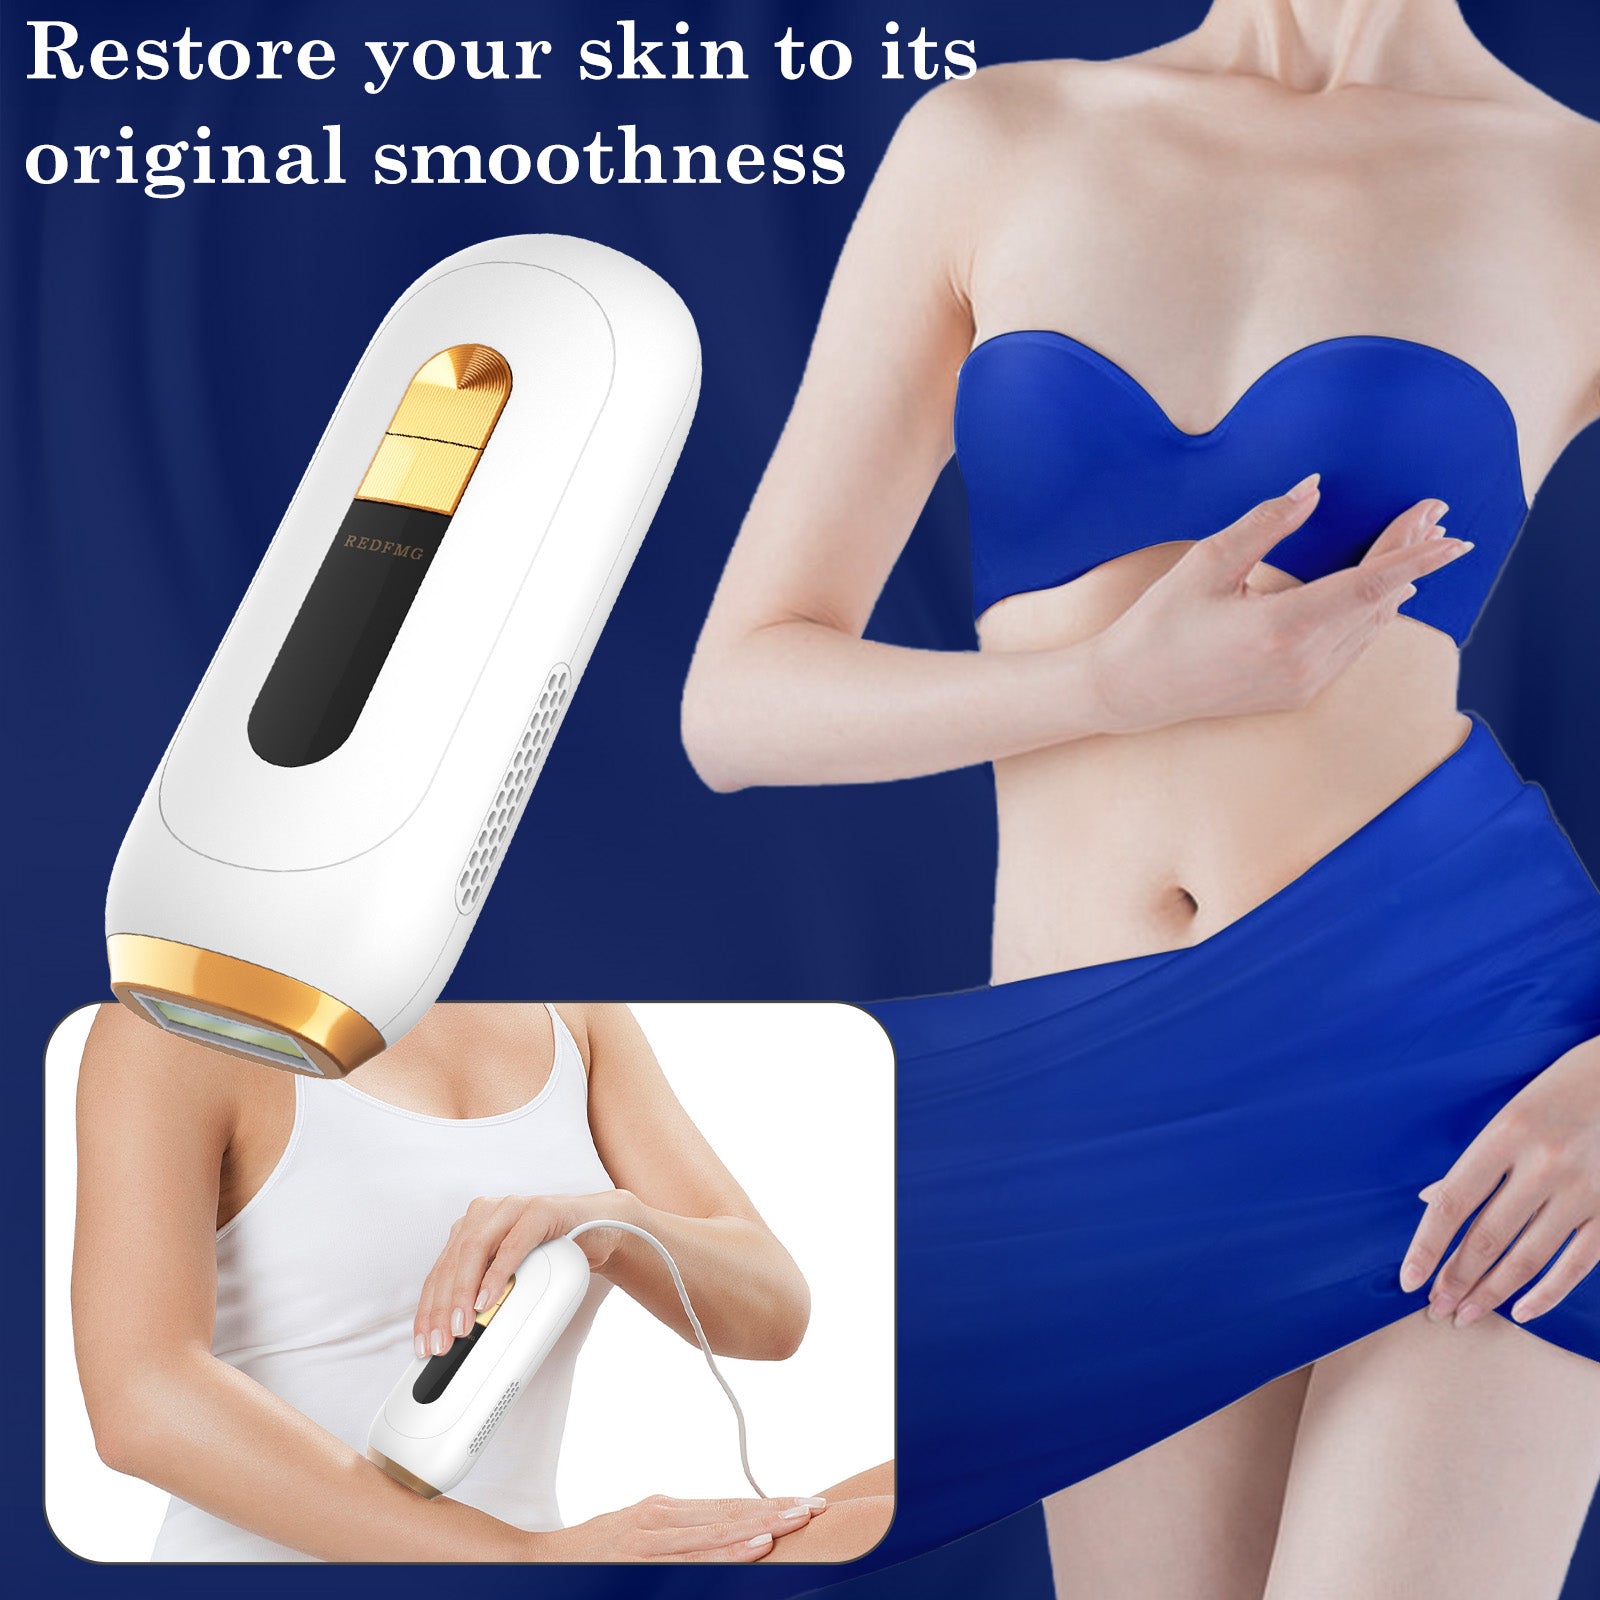 REDFMG Laser Hair Removal for Women and Men, Painless Gentle Hair Removal, 999,990 Flashes Safe and Long-Lasting